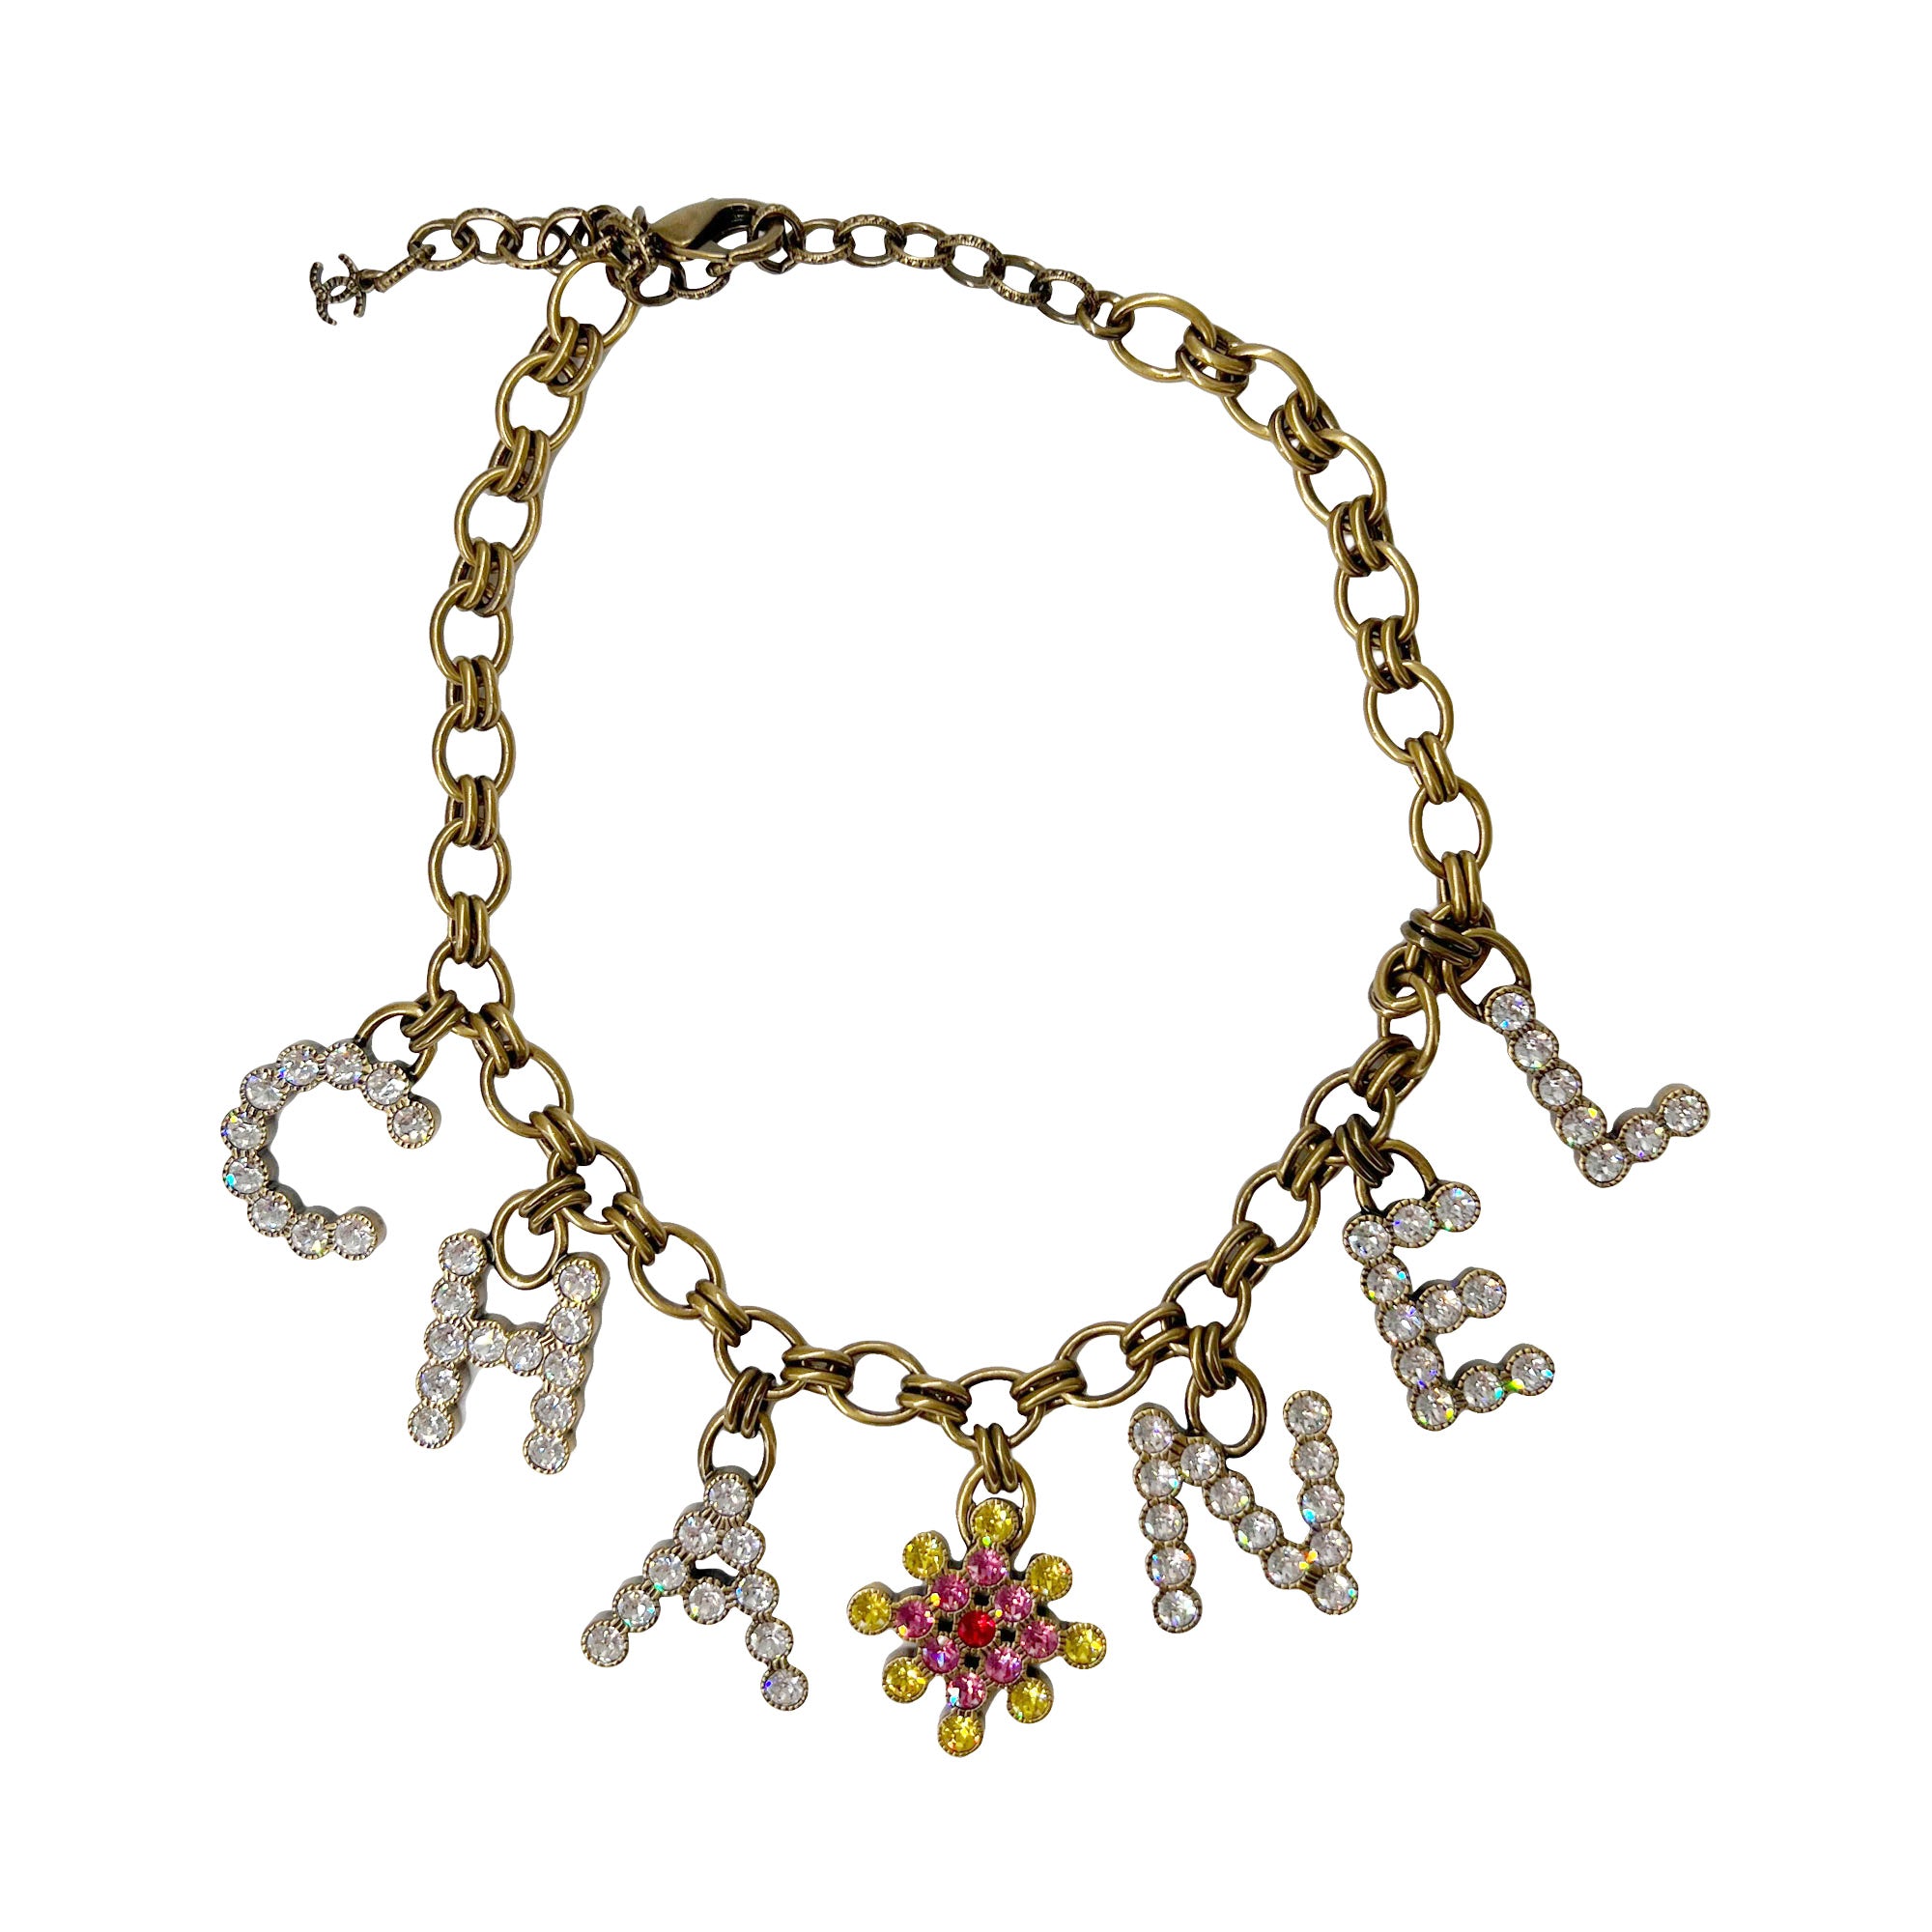 Chanel Gold Metal, Strass CC Chain Link Bracelet, 2021 Available